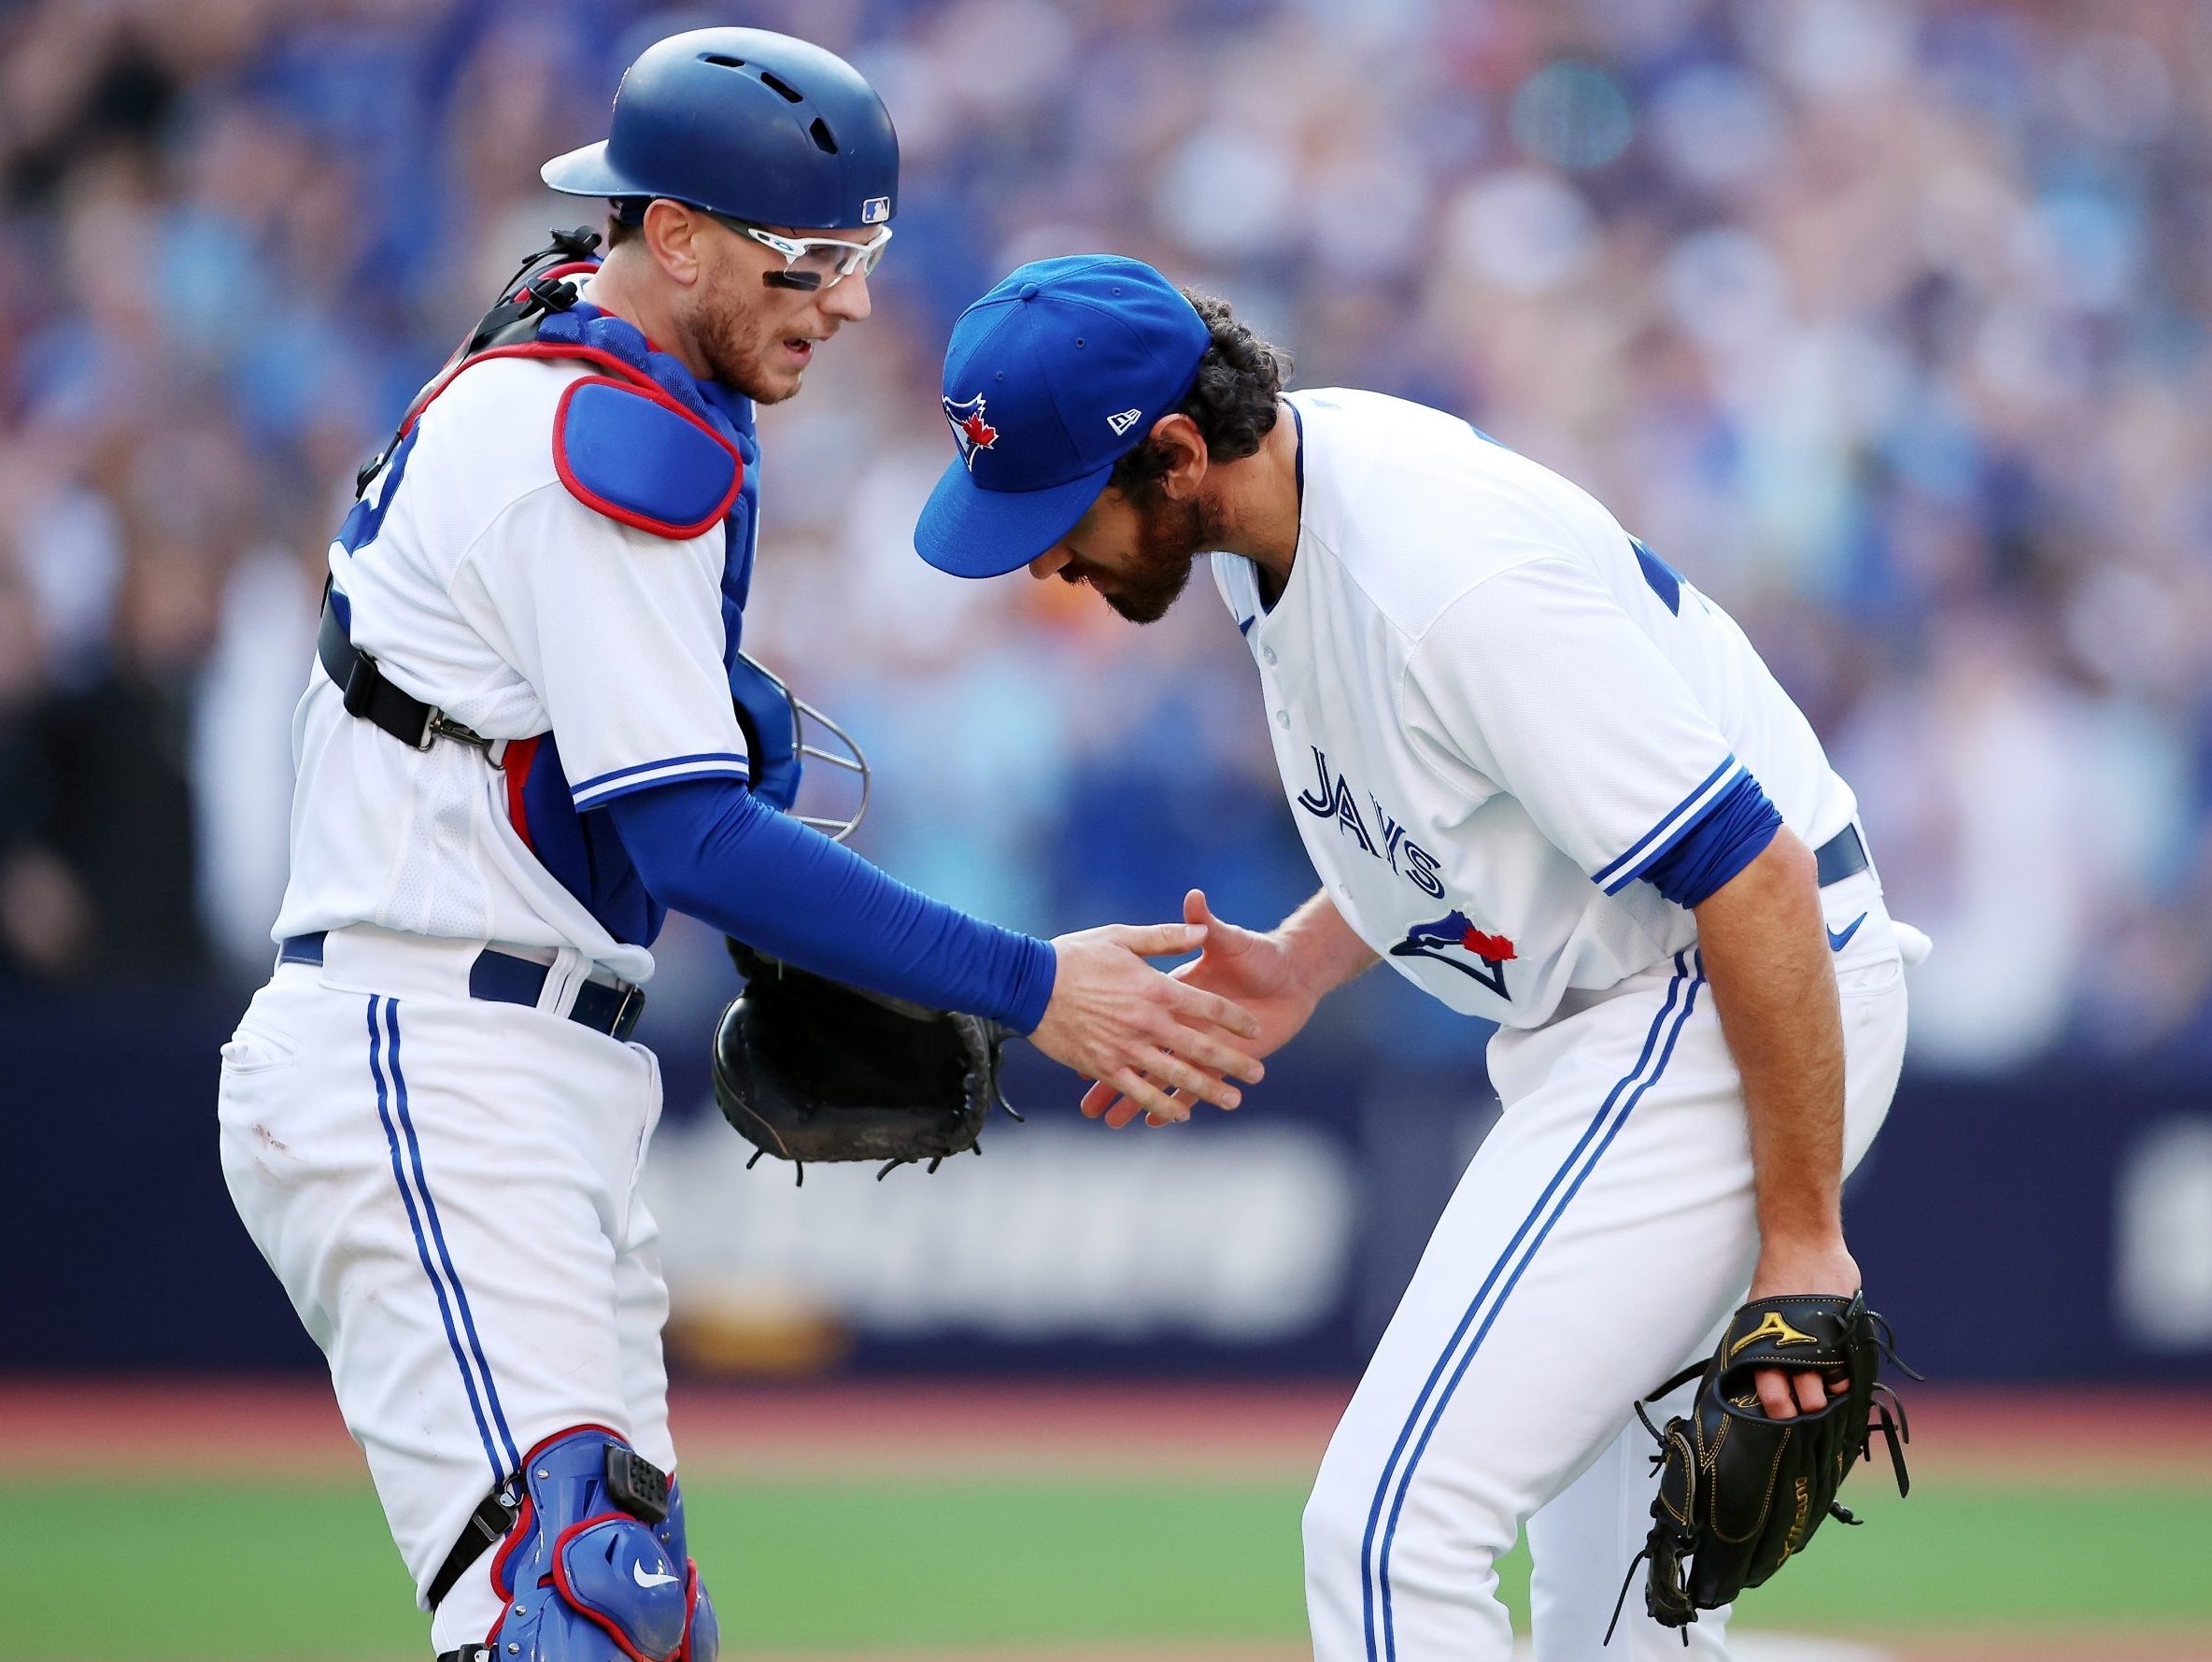 Jays closer Jordan Romano good to go after taking a ball to the